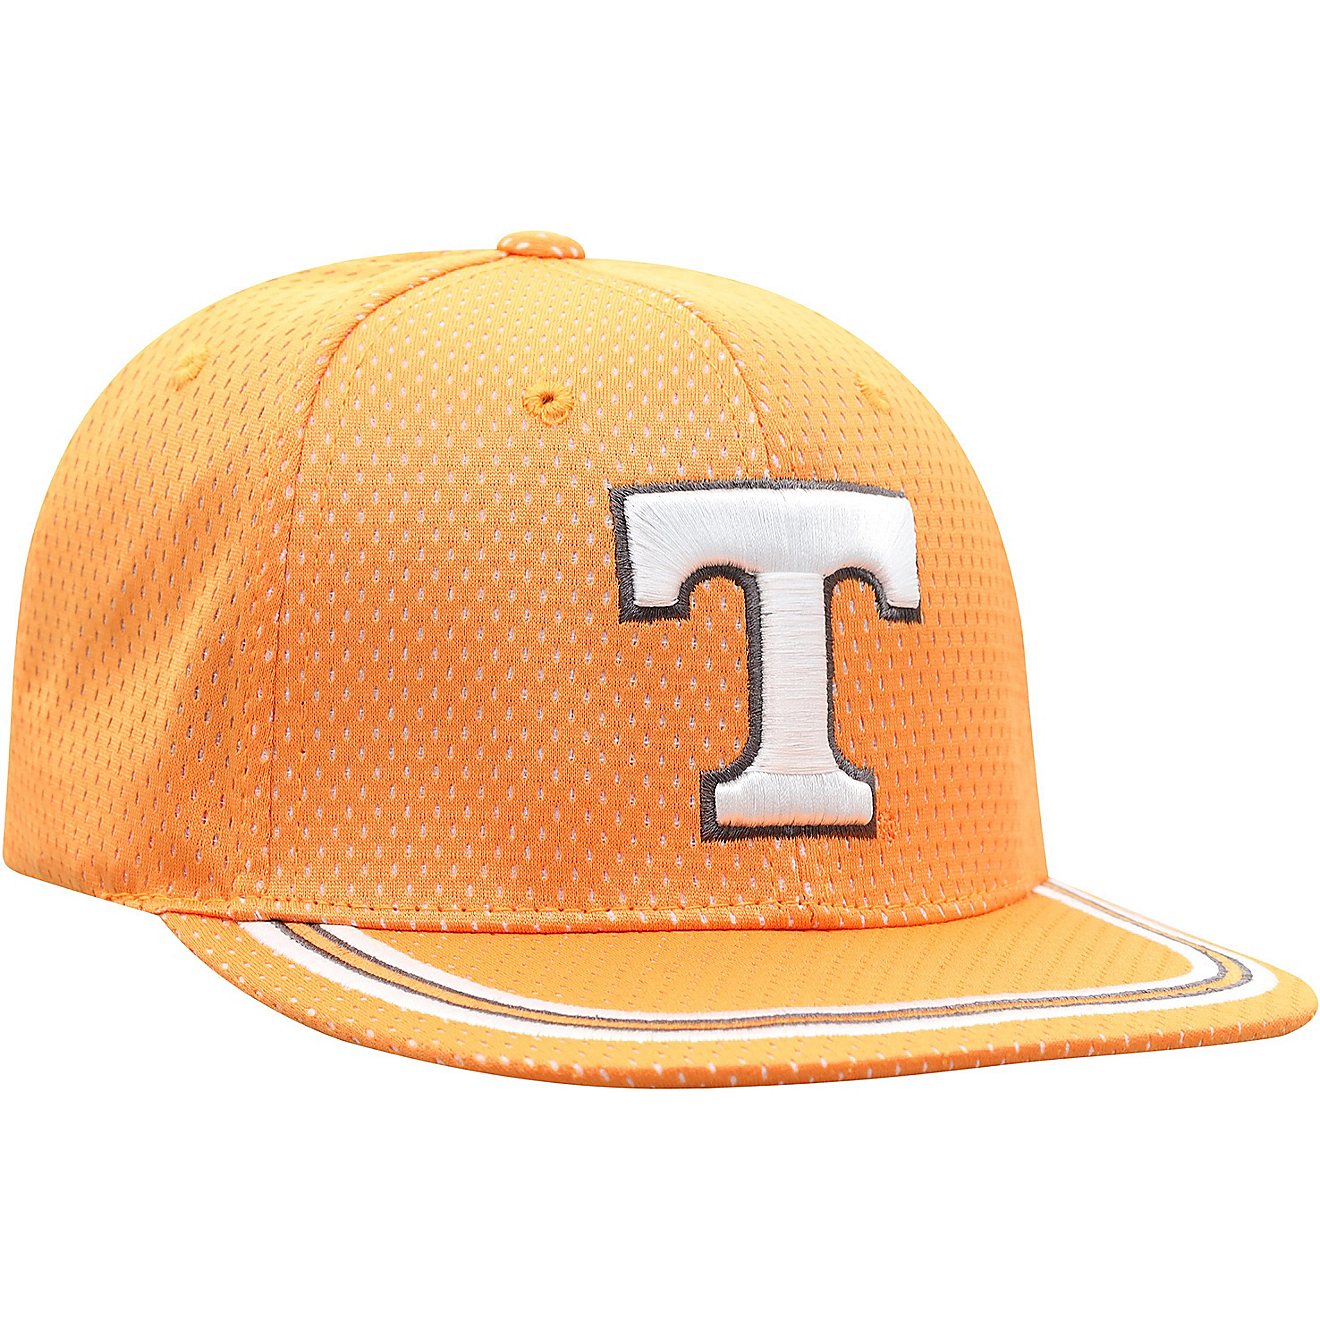 Top of the World Kids' University of Tennessee Spiker Adjustable Cap                                                             - view number 1